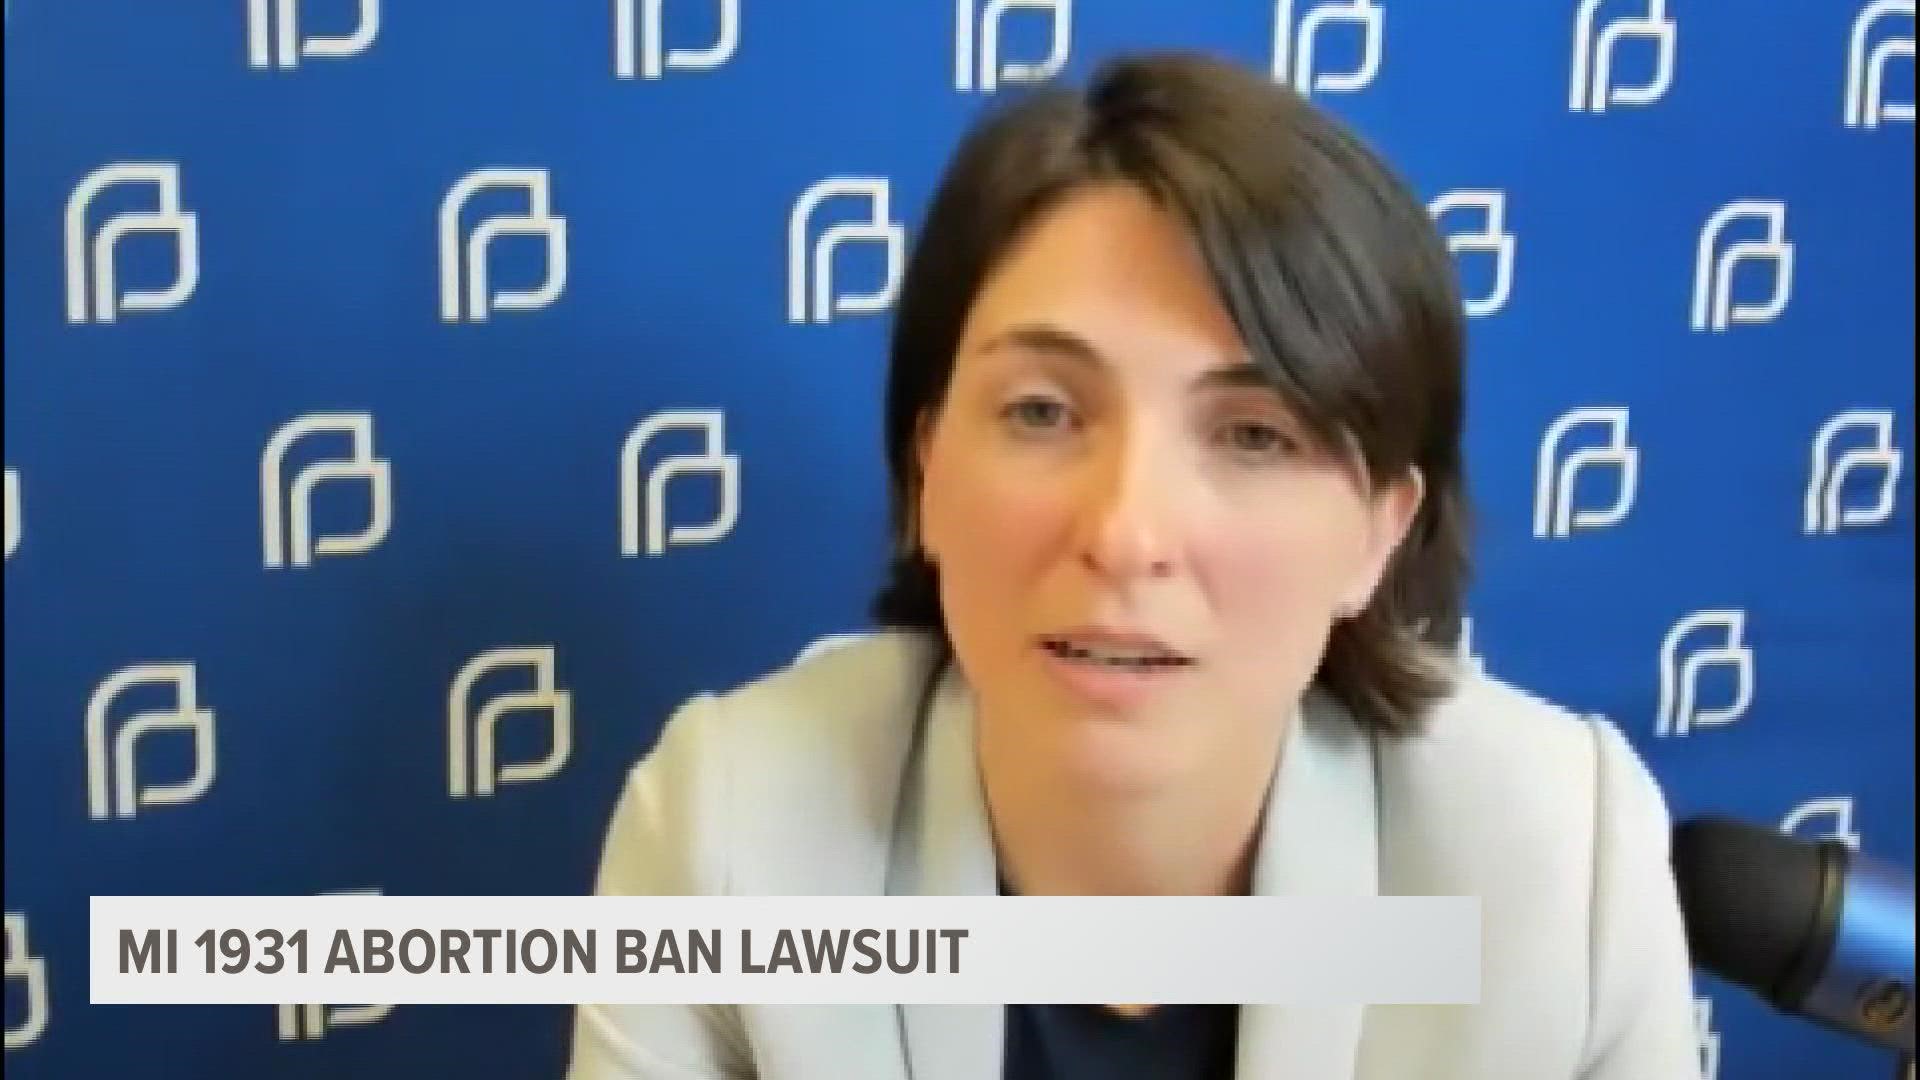 Planned Parenthood of Michigan filed a lawsuit Thursday against the state's Attorney General over the ban.